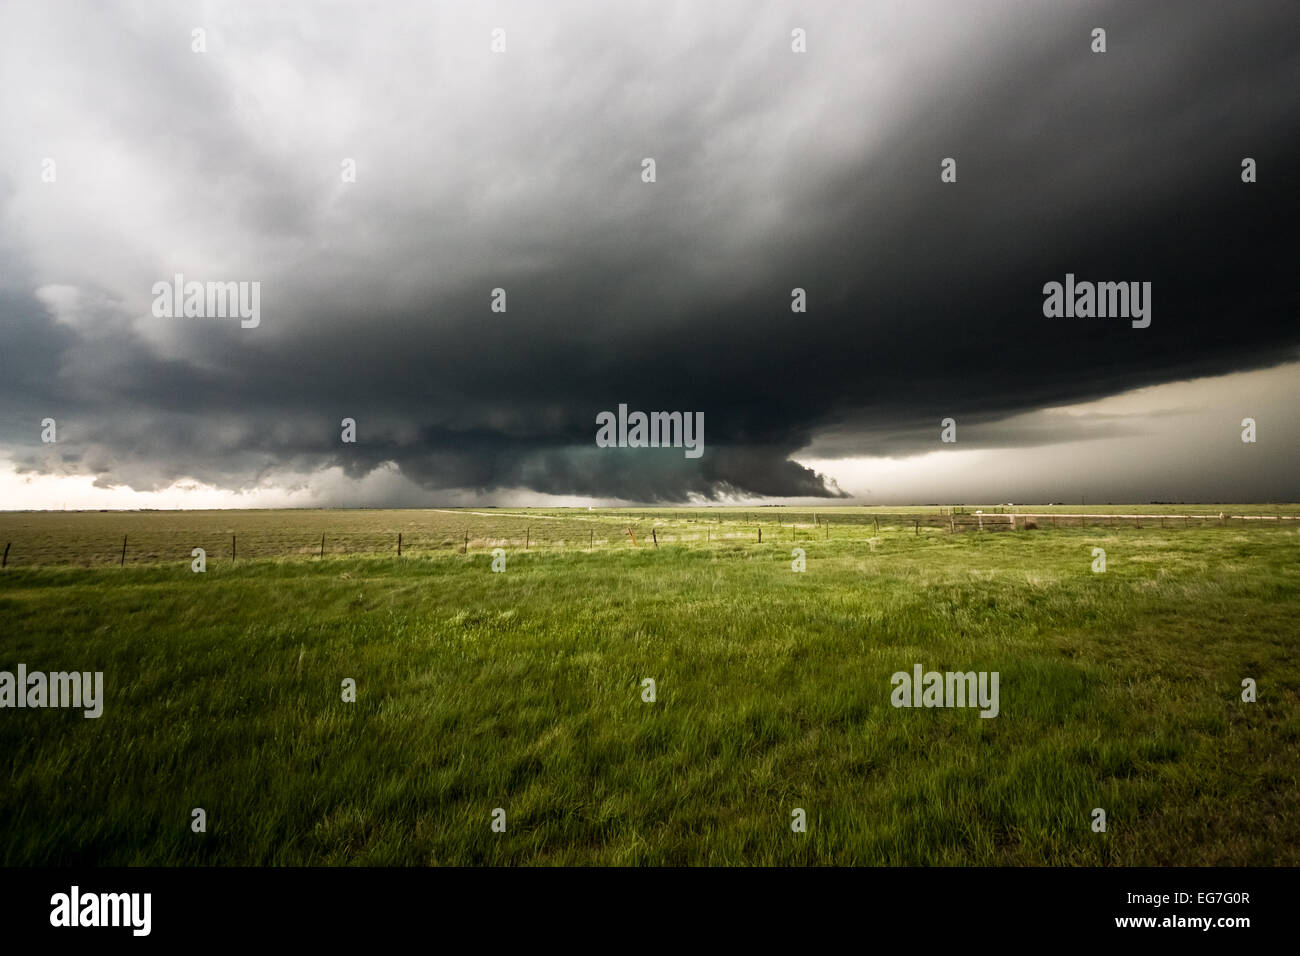 A powerful tornado warned supercell thunderstorm rolls across the Texas landscape with a large wall cloud and green hail core Stock Photo